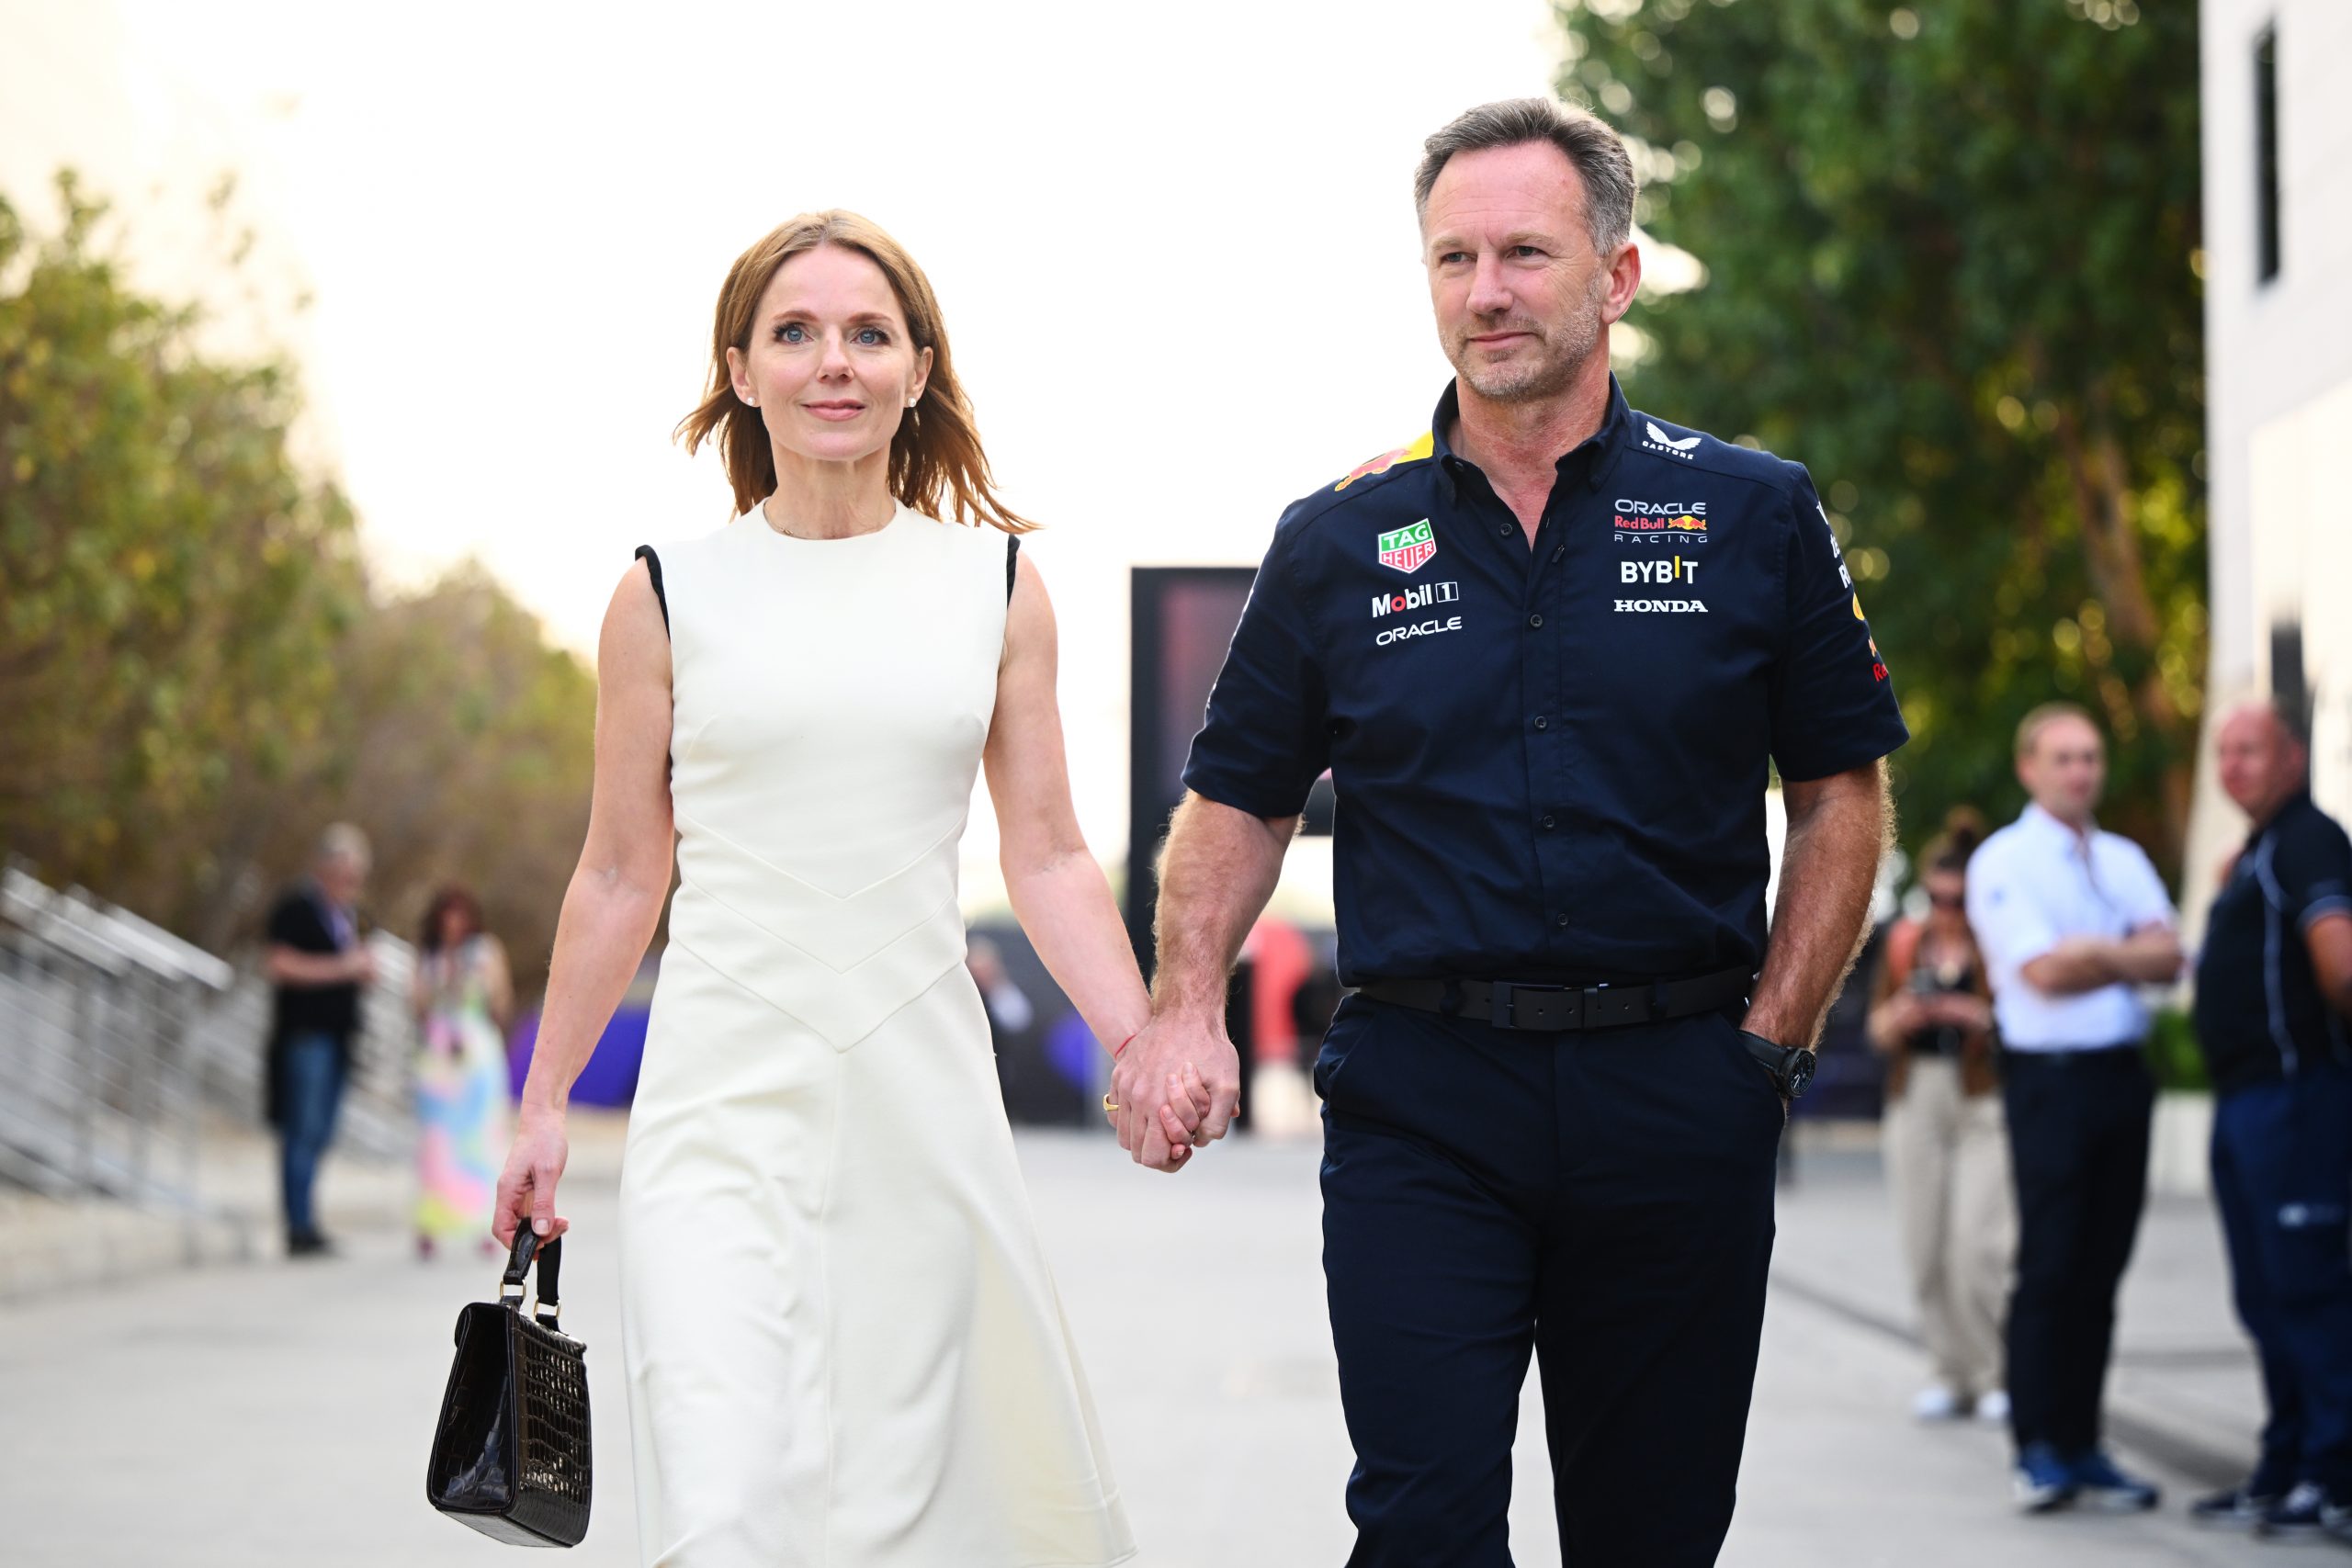 ‘Brave’ Geri Horner dresses in her signature white as she puts on a show of solidarity with husband Christian Horner